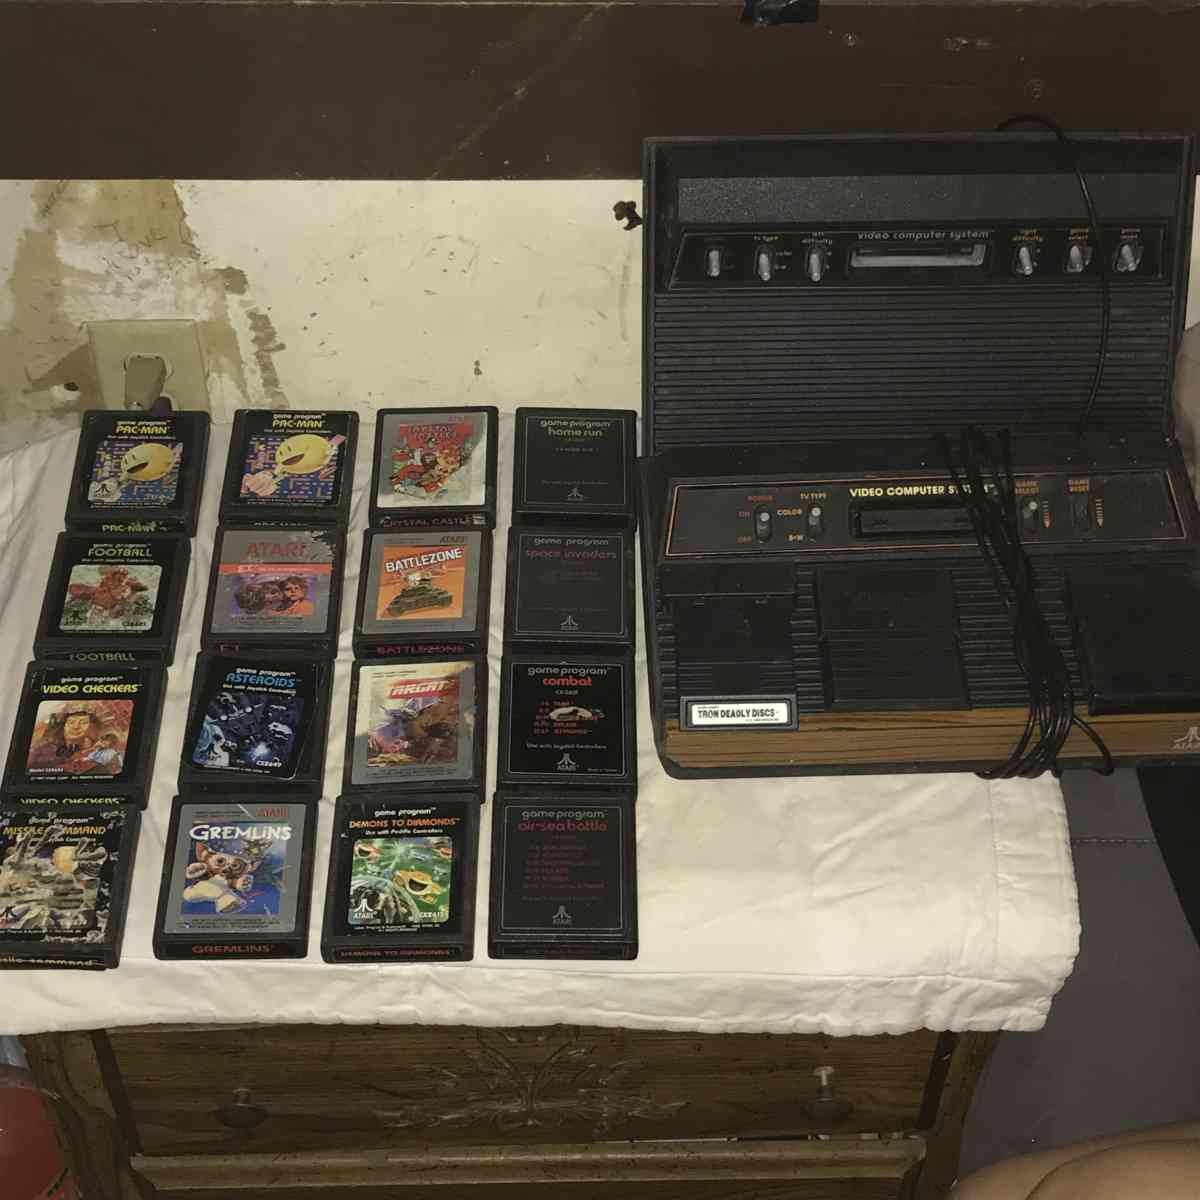 2 Atari system and 19 games and other controllers